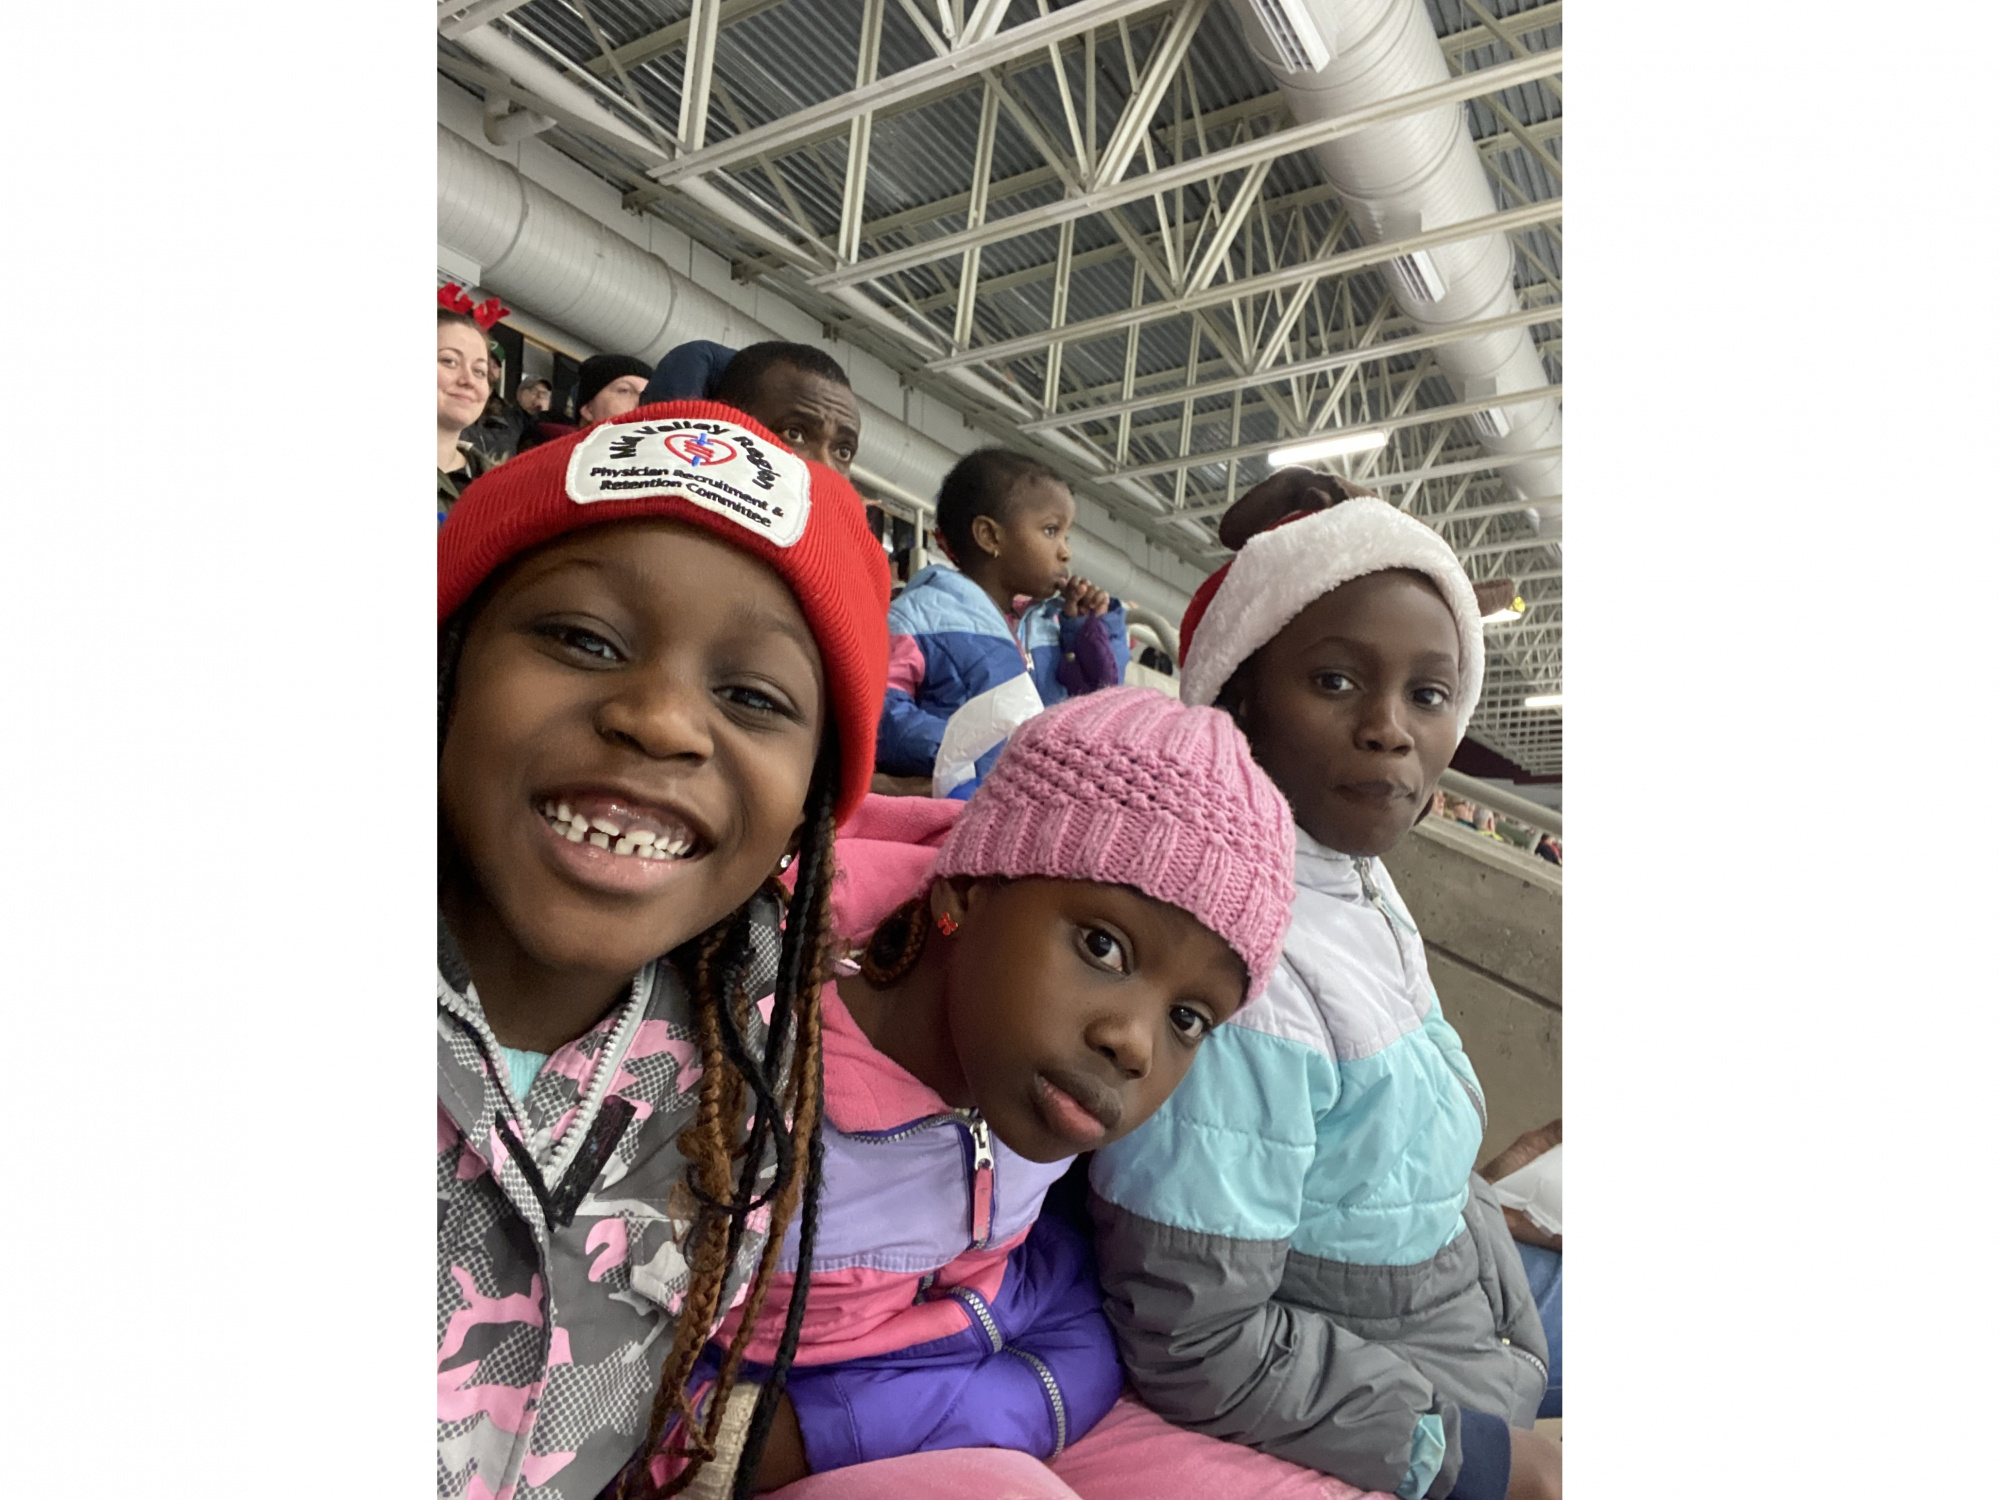 Three children sitting together in the bleachers at a hockey game